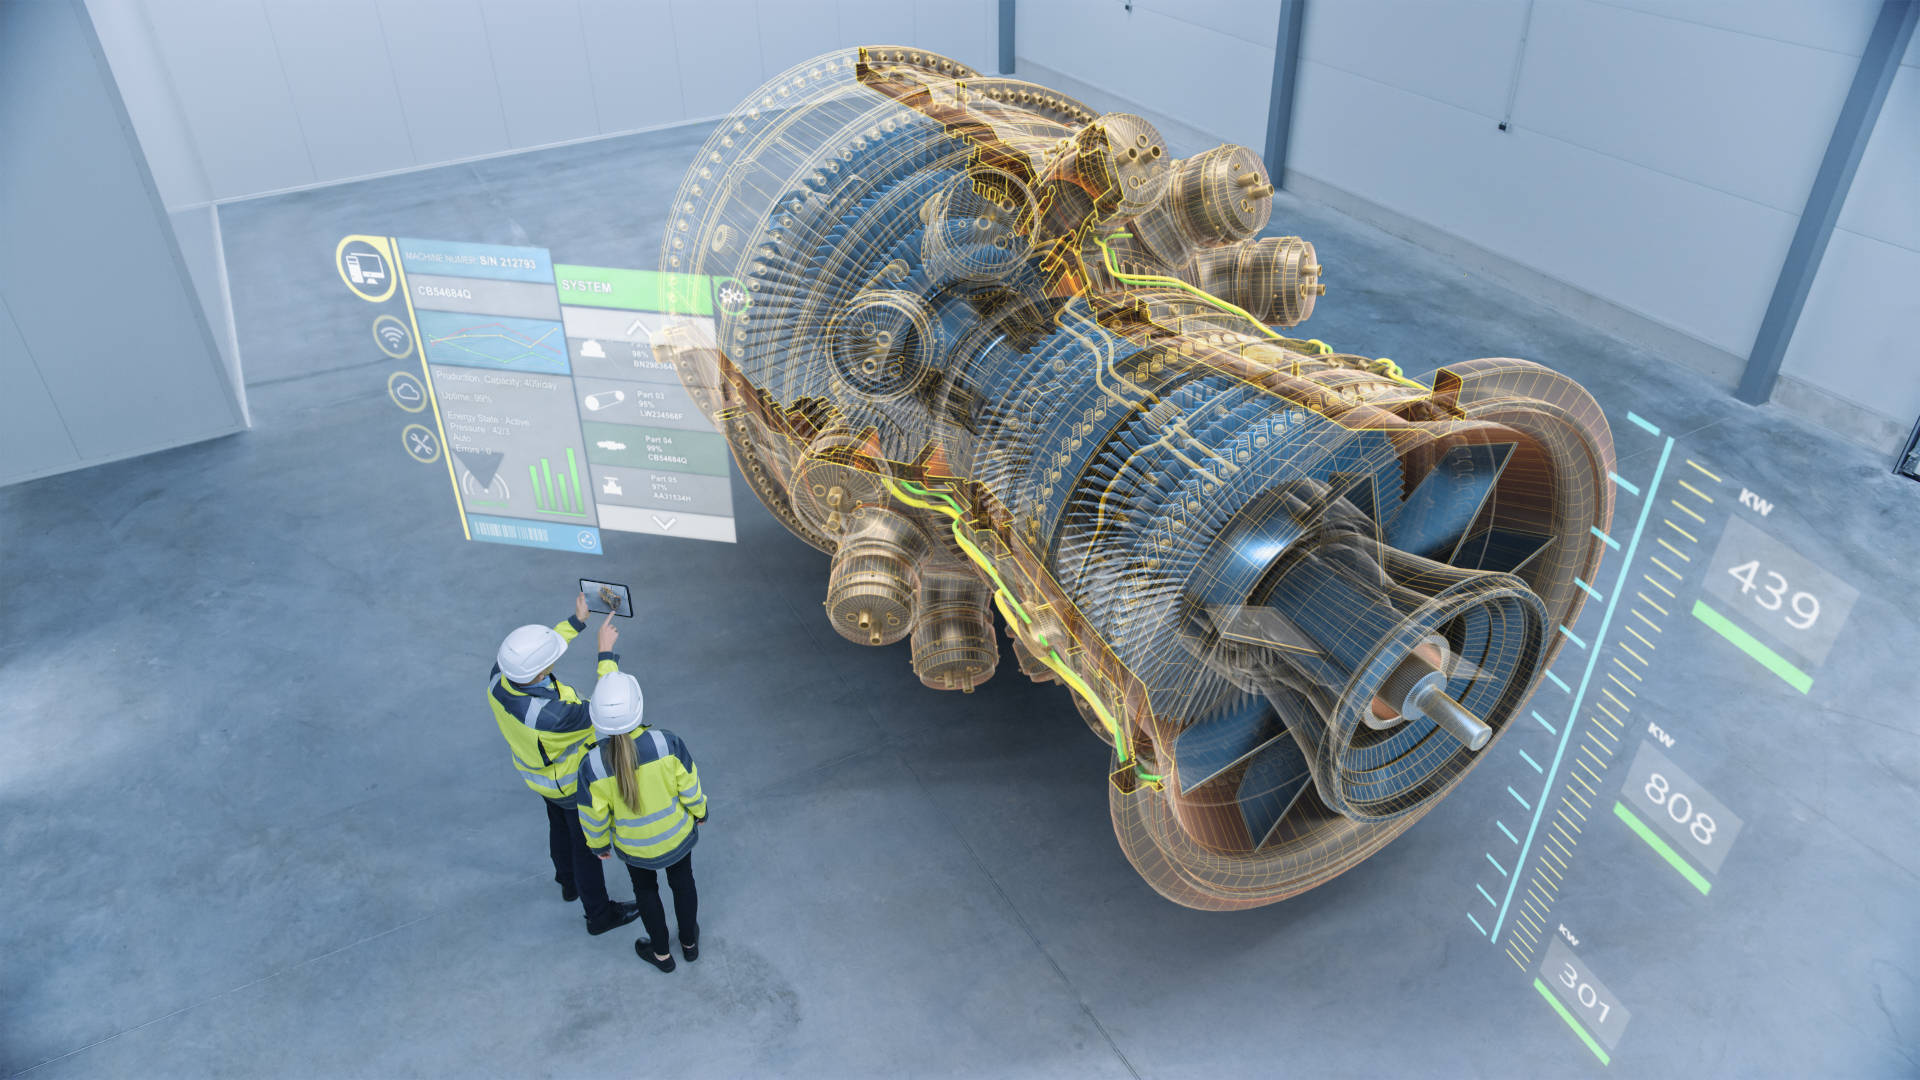 experience the internals of an aircraft engine using augmented reality